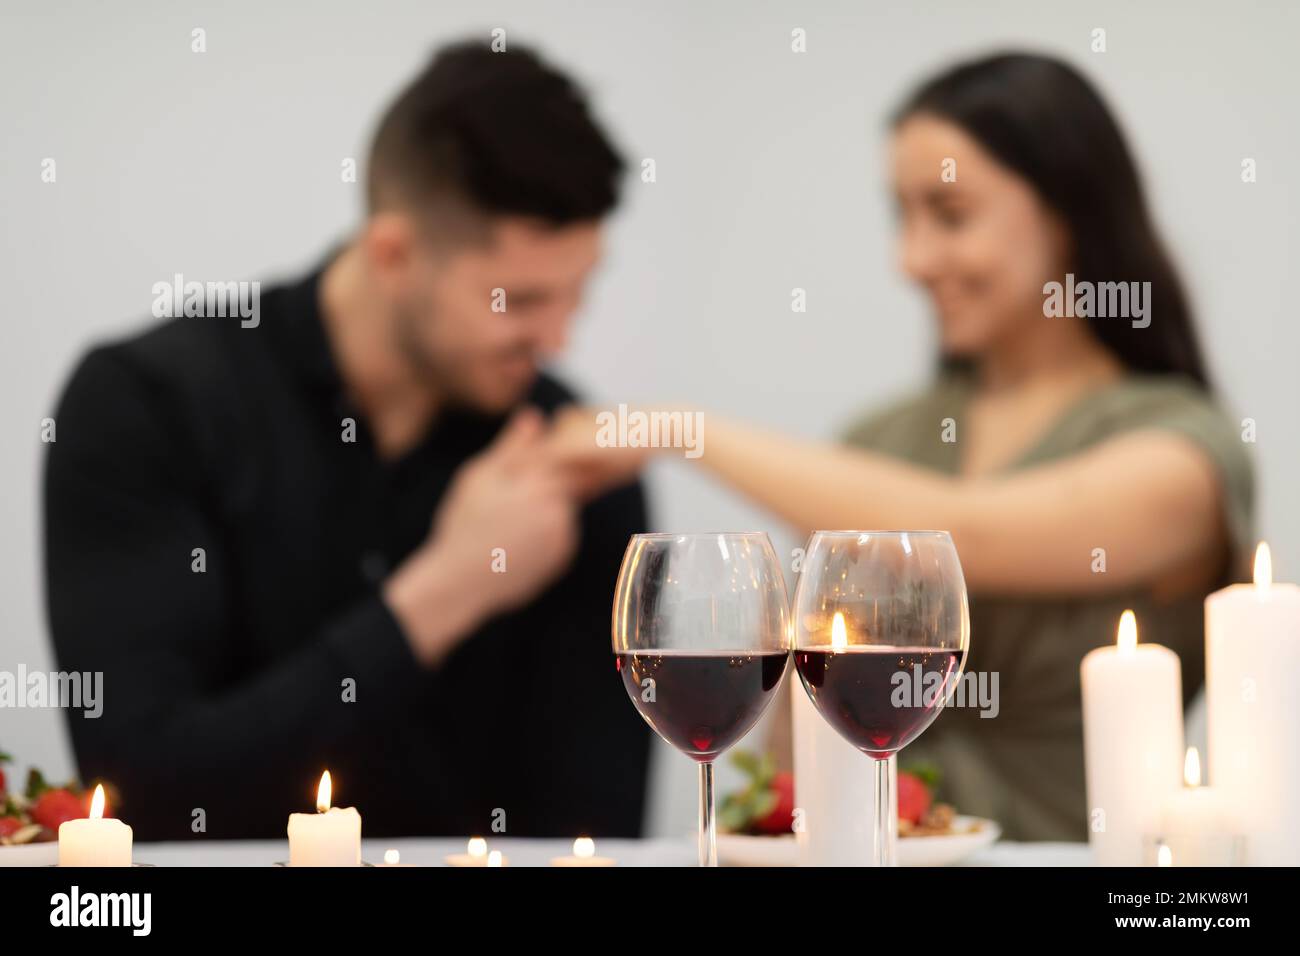 Selective focus on glasses with red wine over bonding couple Stock Photo